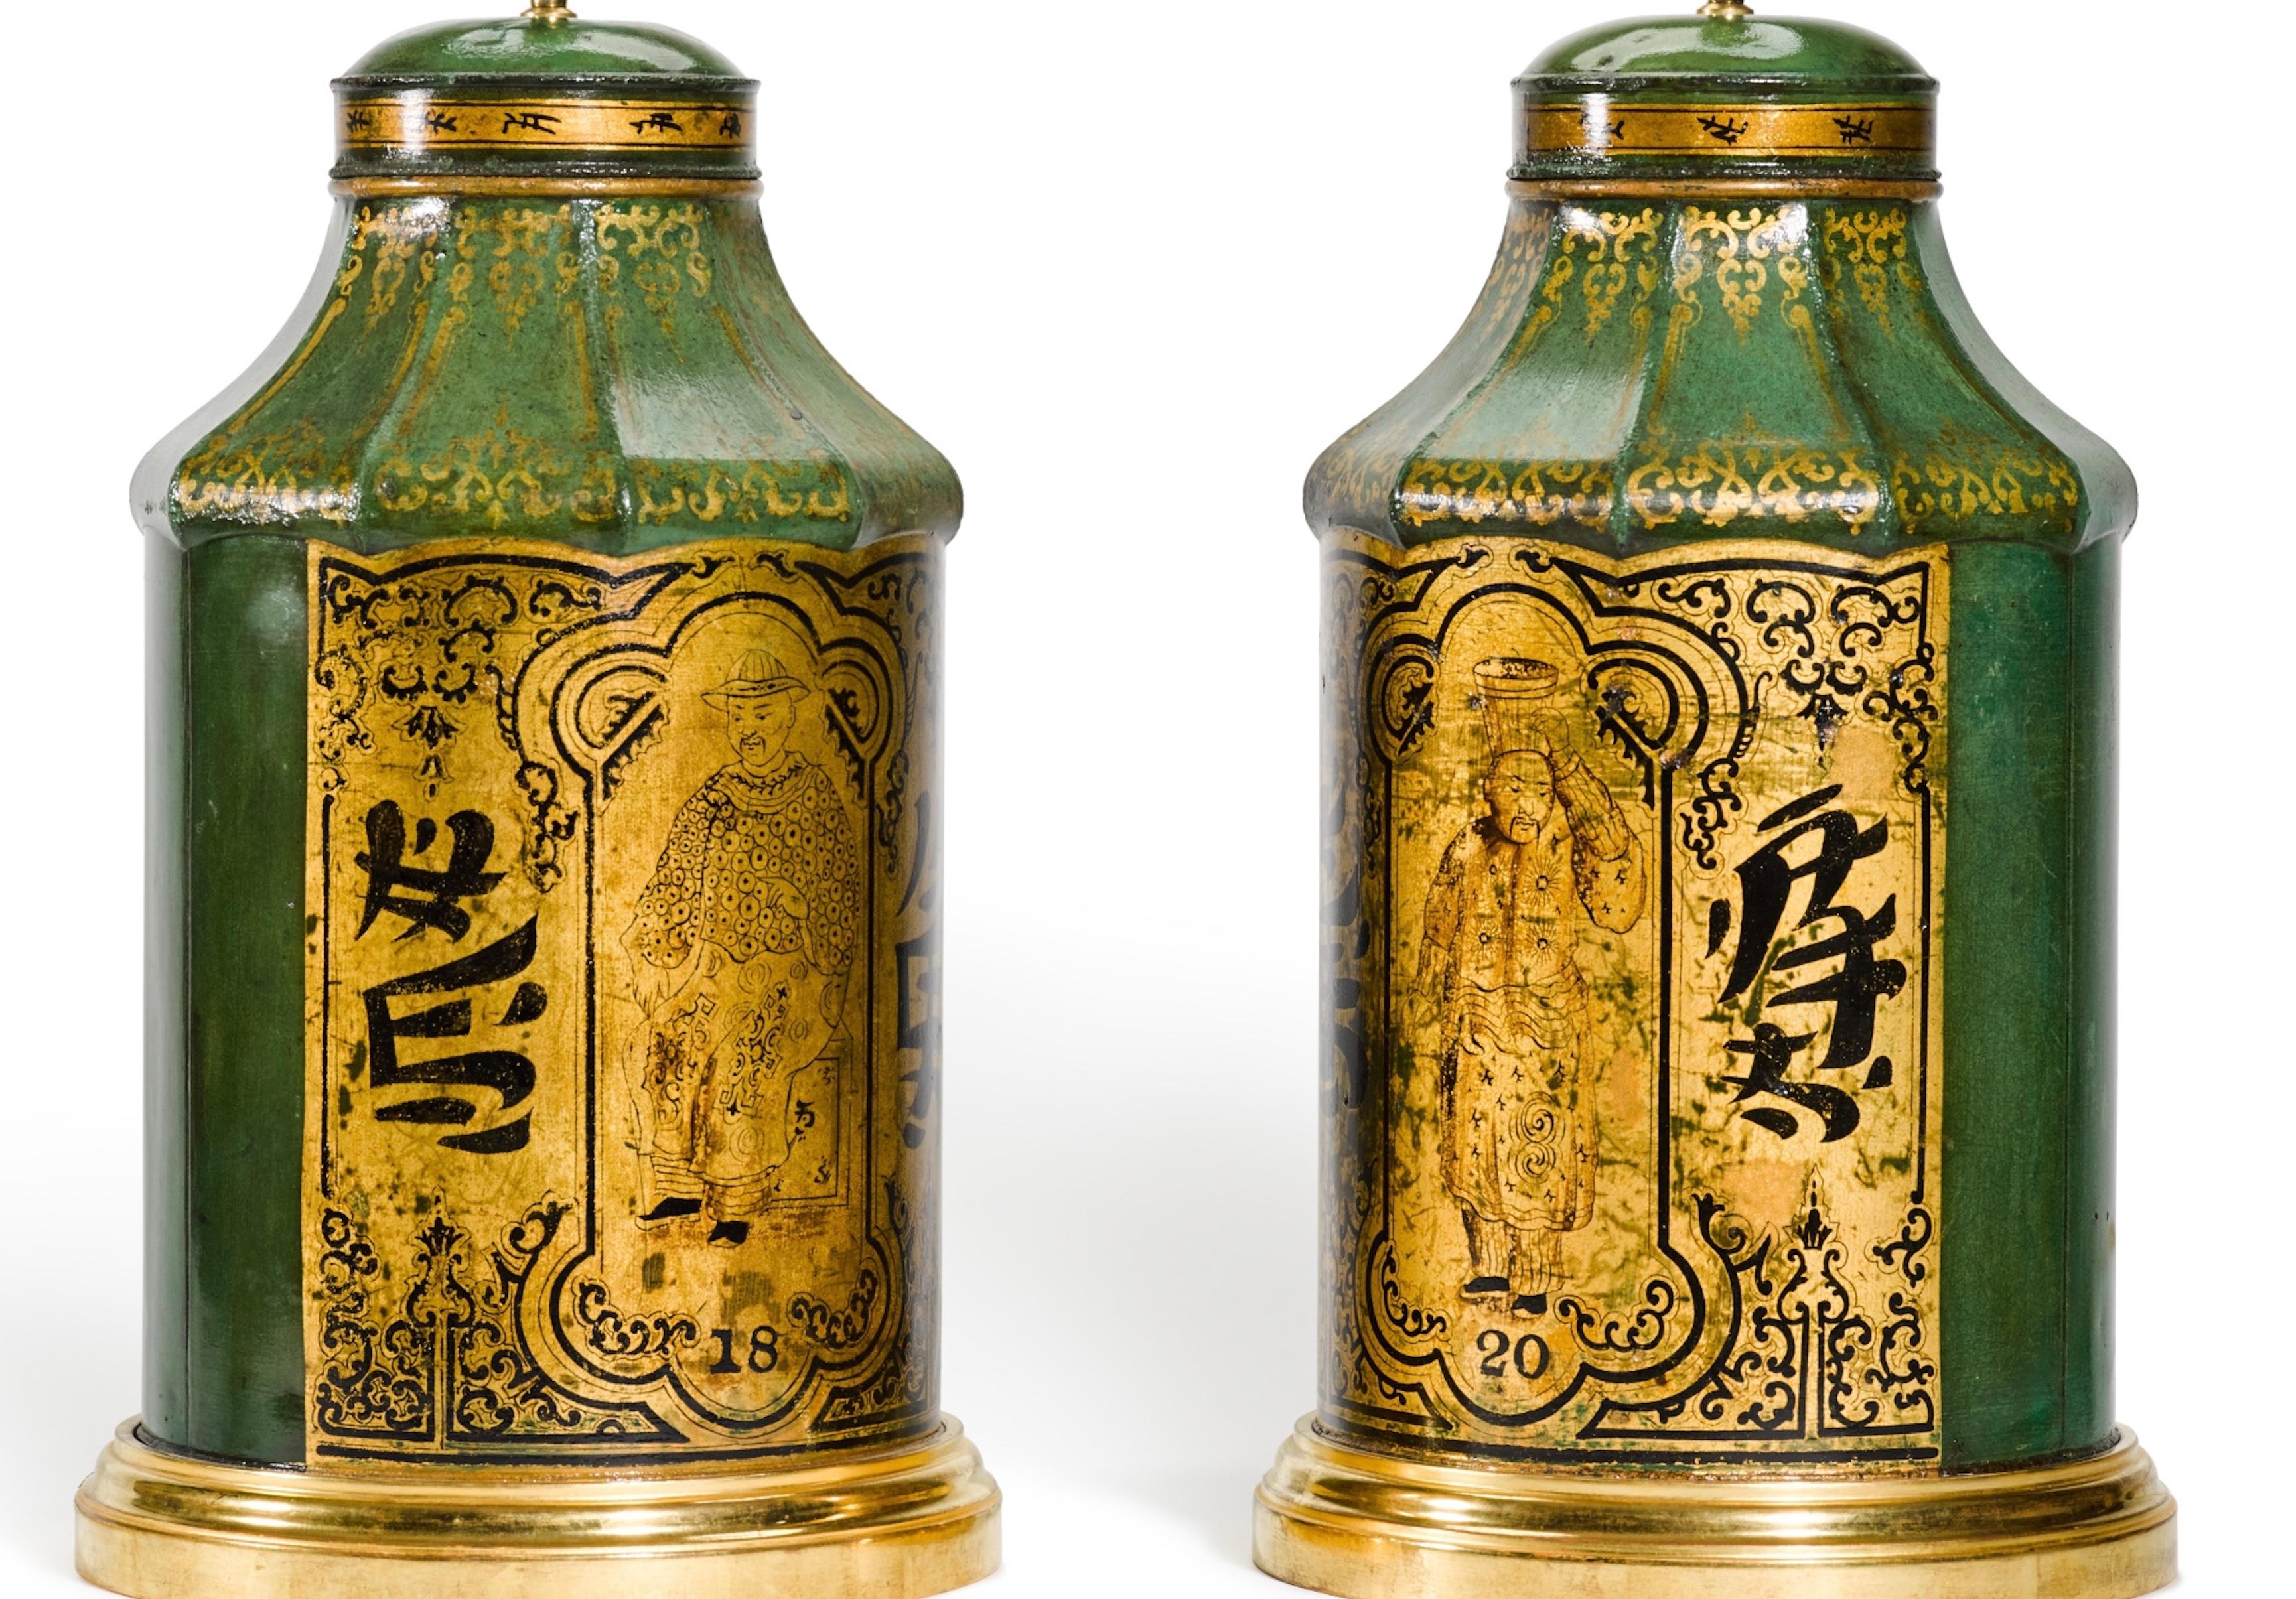 English Pair of Gold and Green 19th Century Tea Canister Antique Table Lamps For Sale